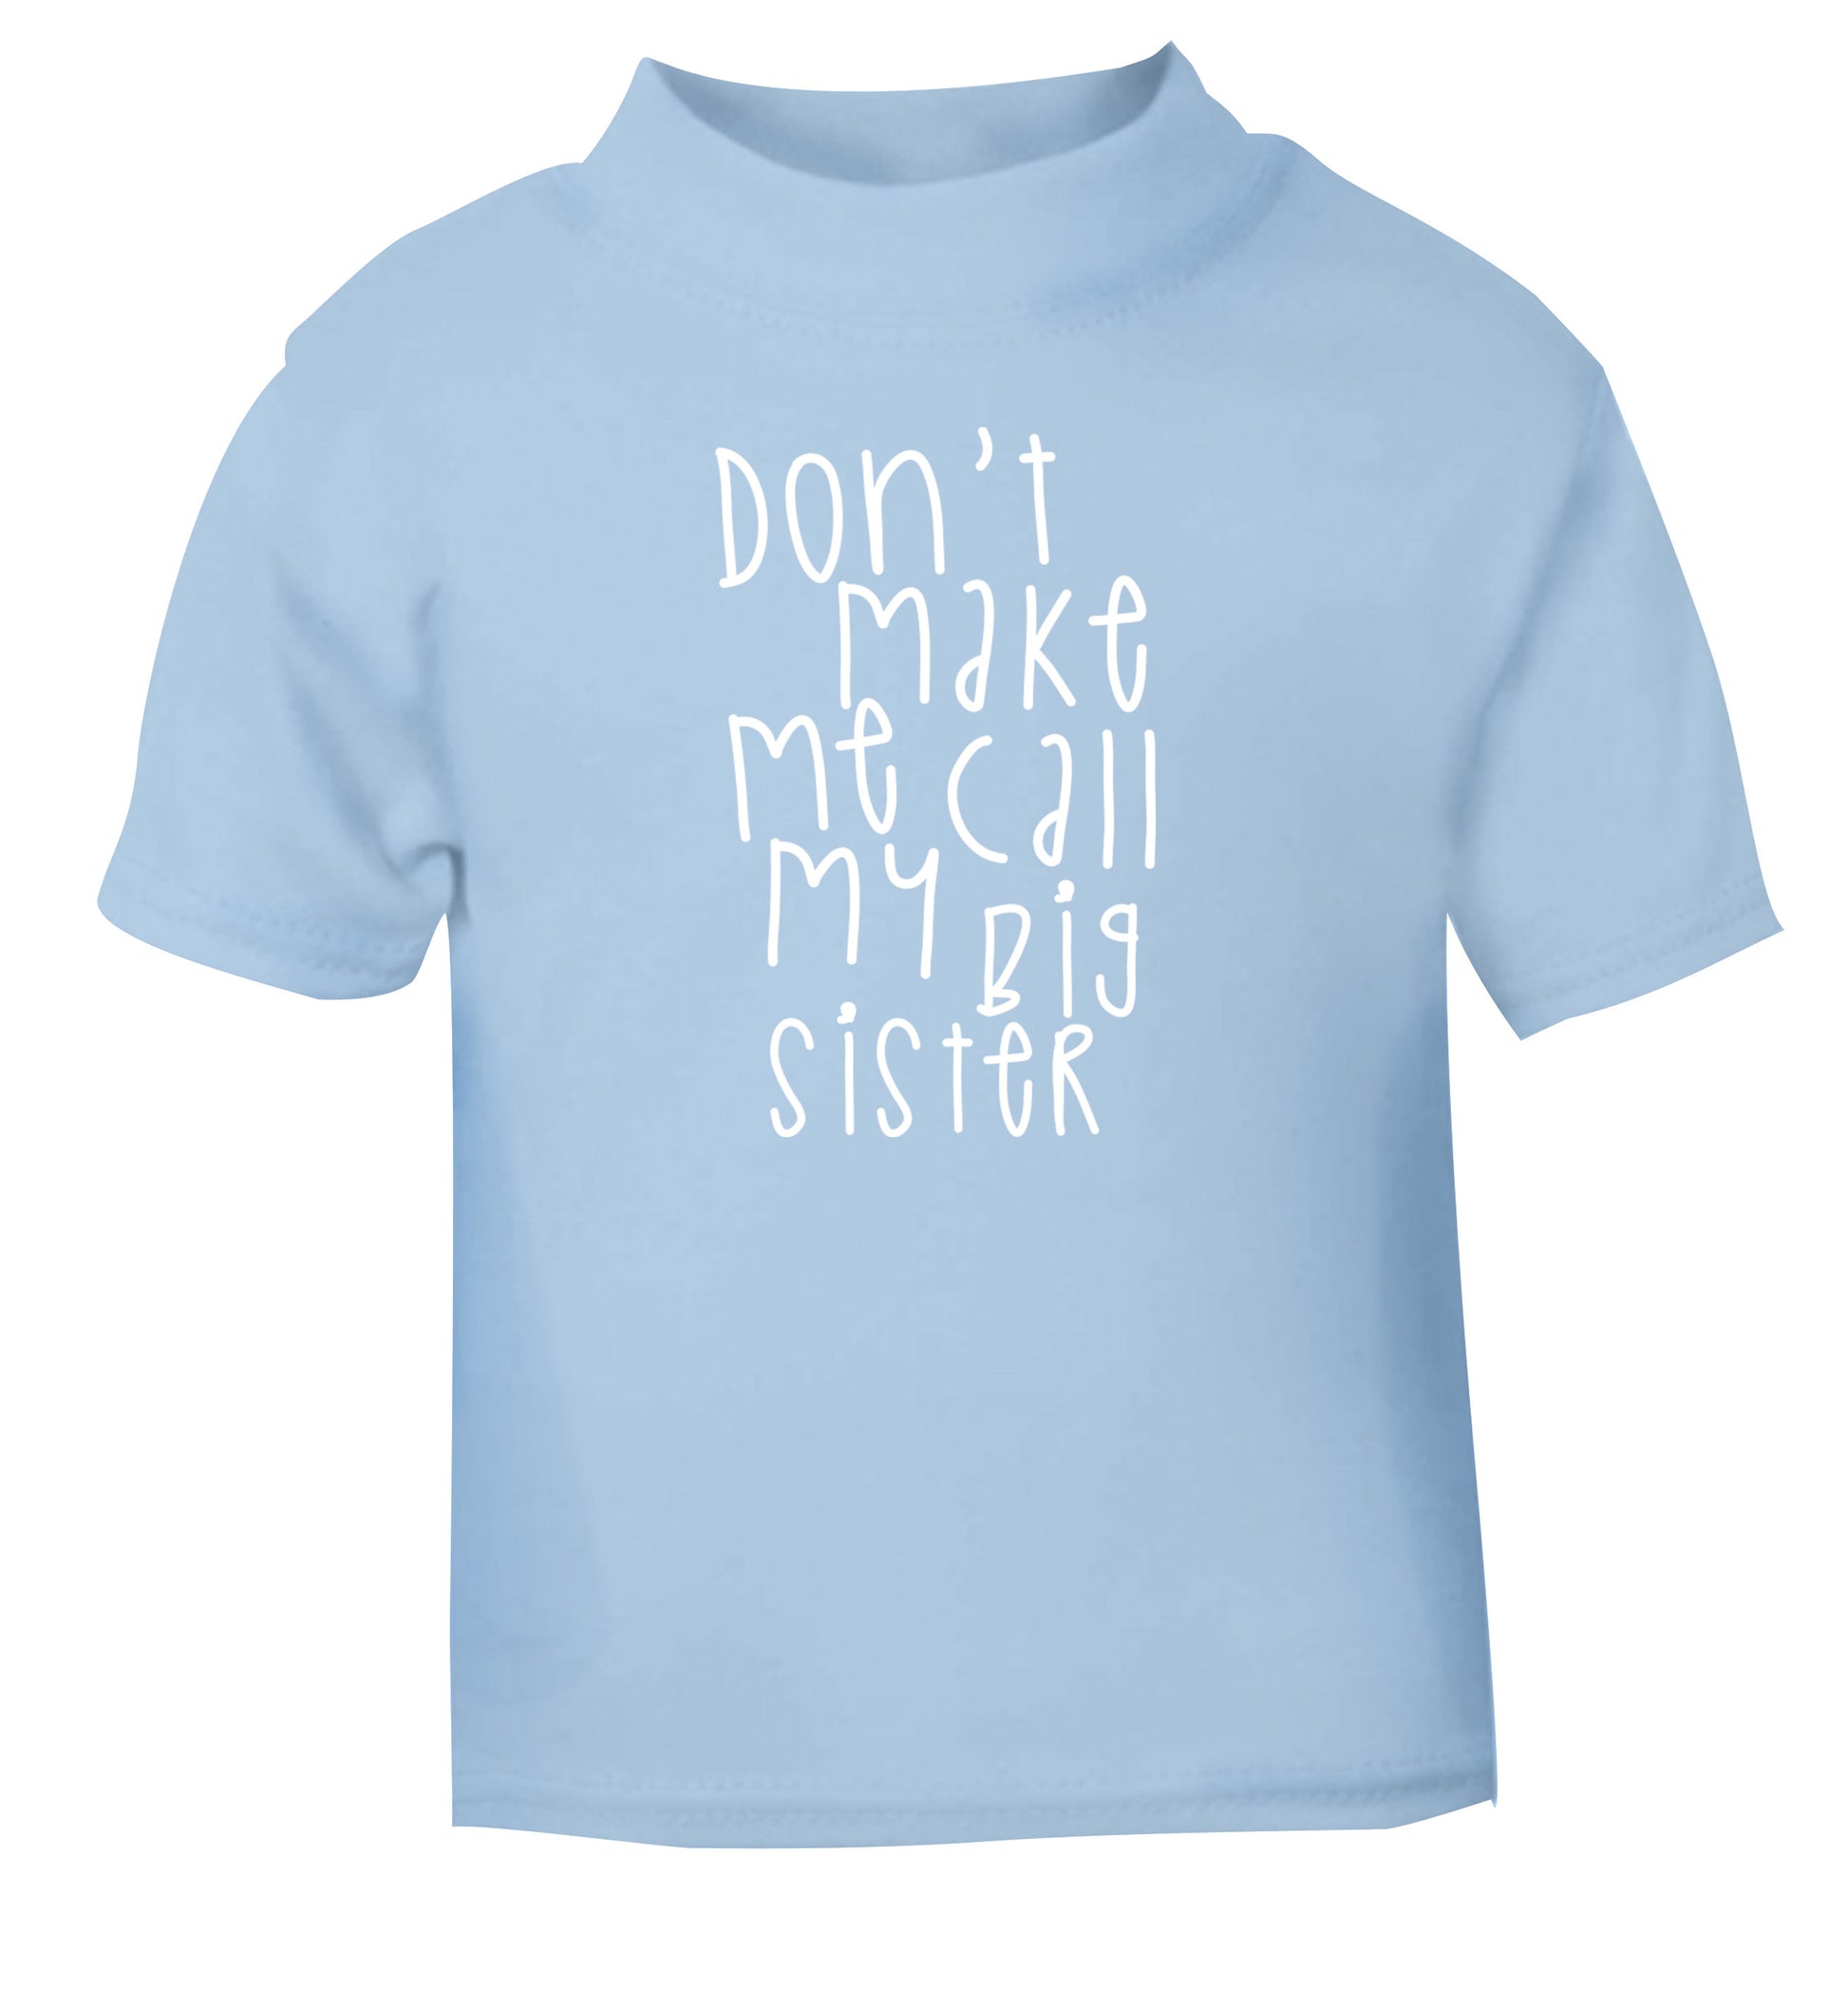 Don't make me call my big sister light blue Baby Toddler Tshirt 2 Years